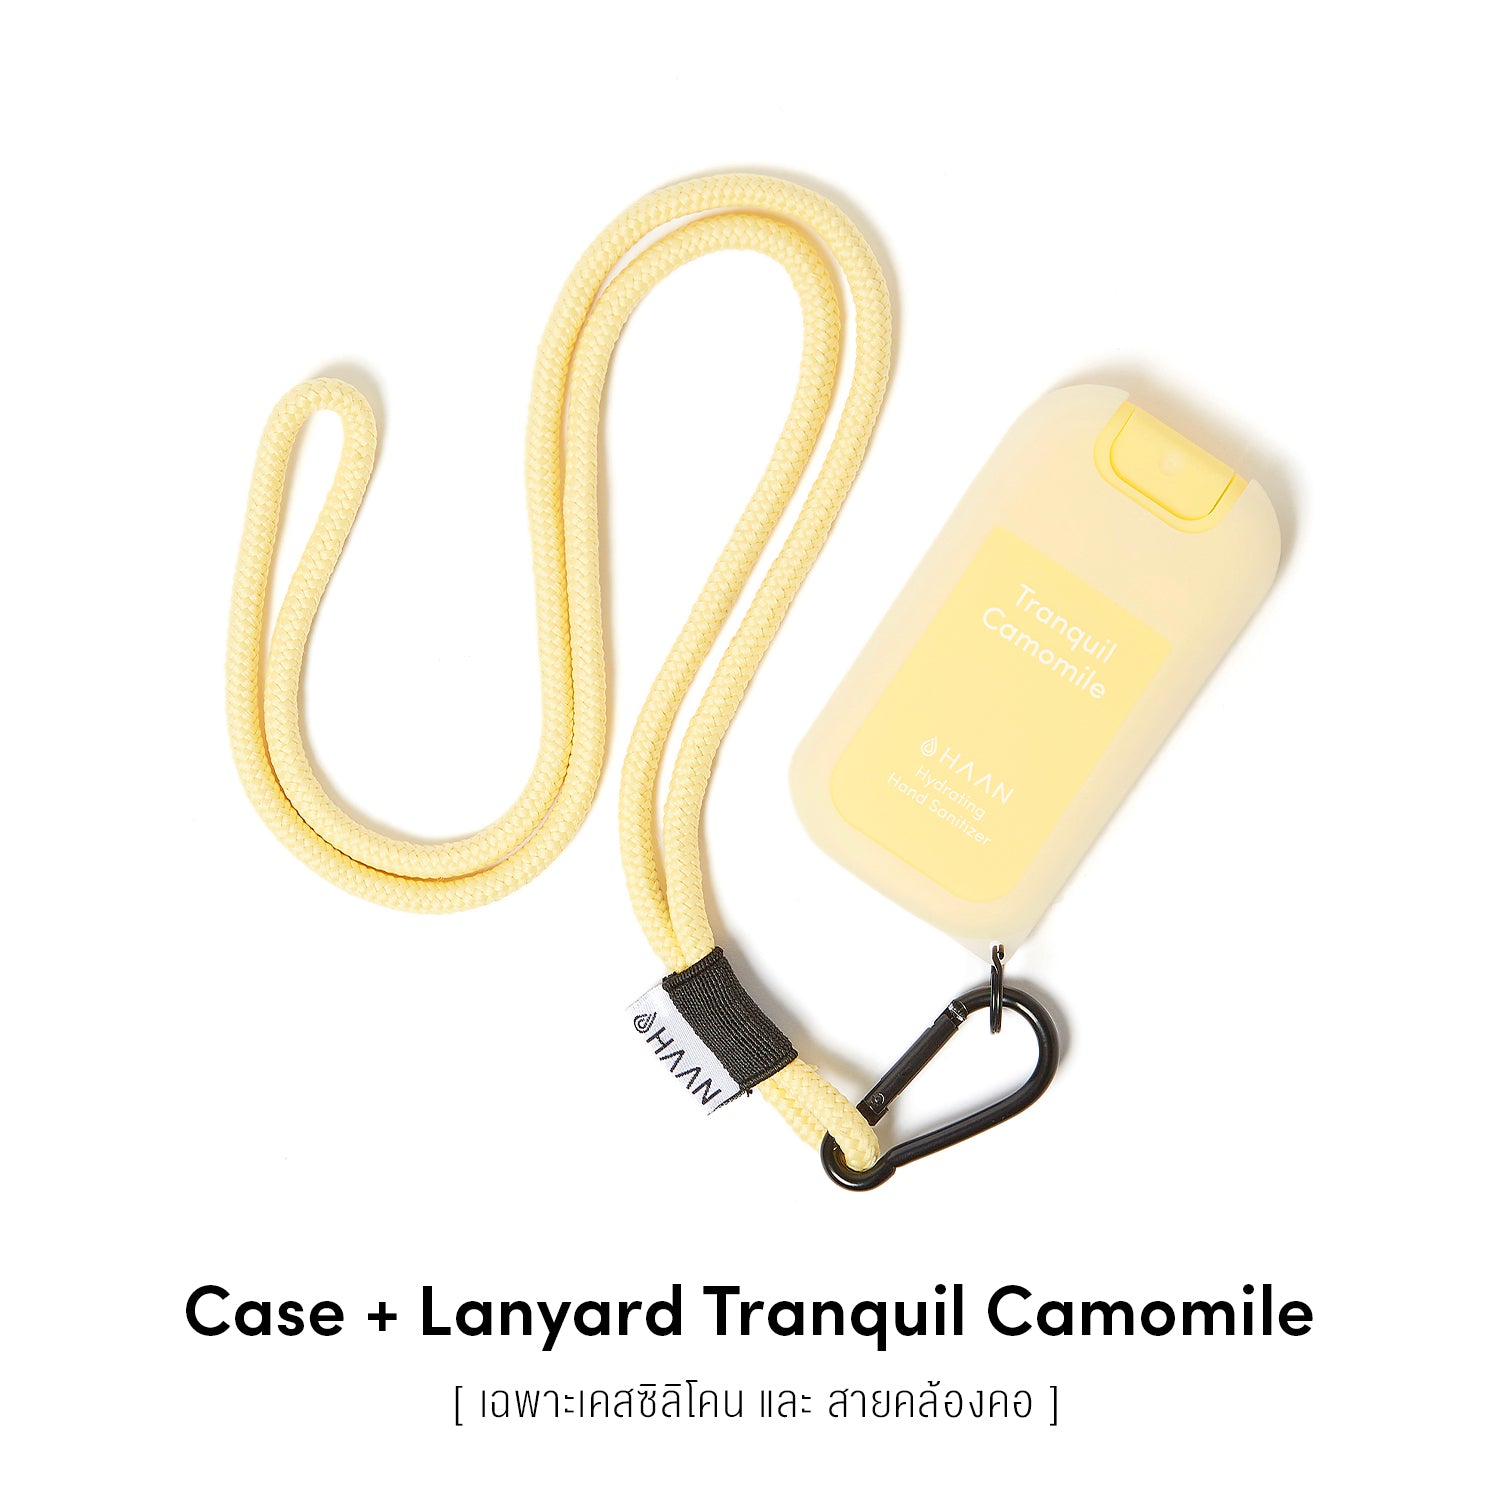 HAAN Case+Lanyard - Tranquil Camomile